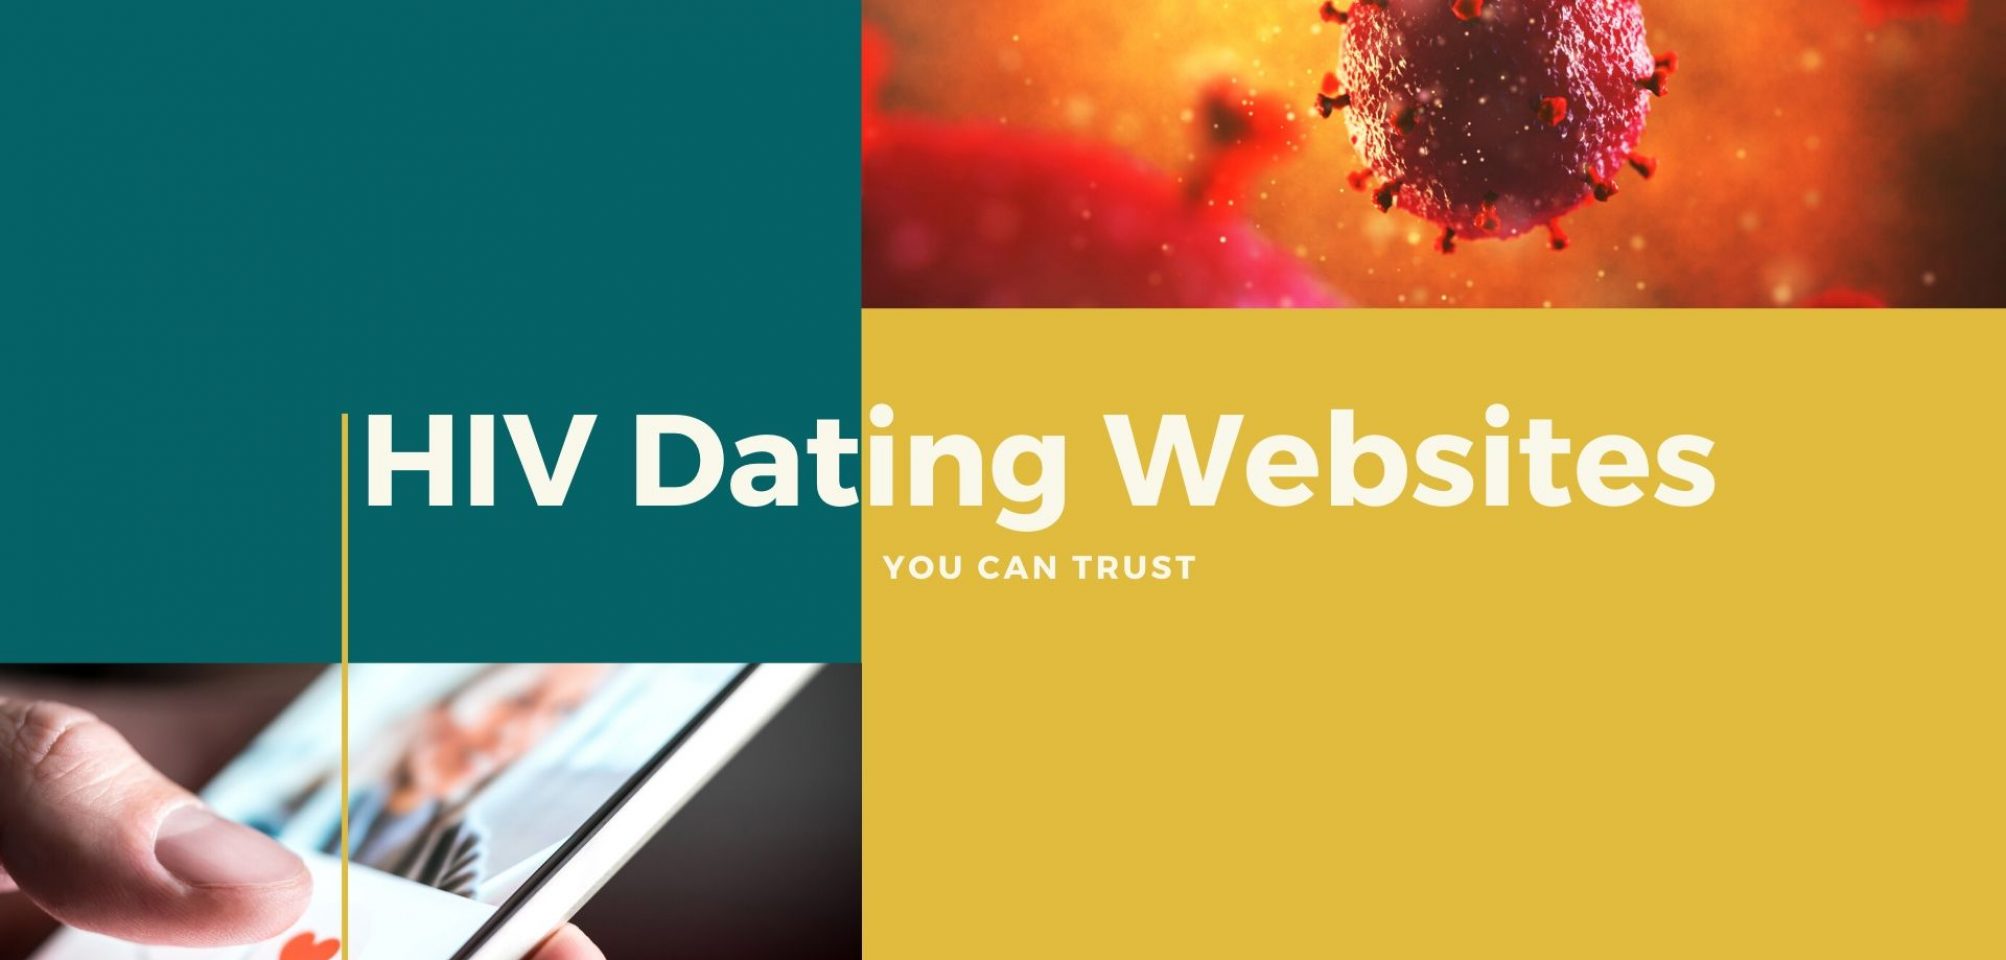 Reliable HIV Dating Websites you can Trust Online